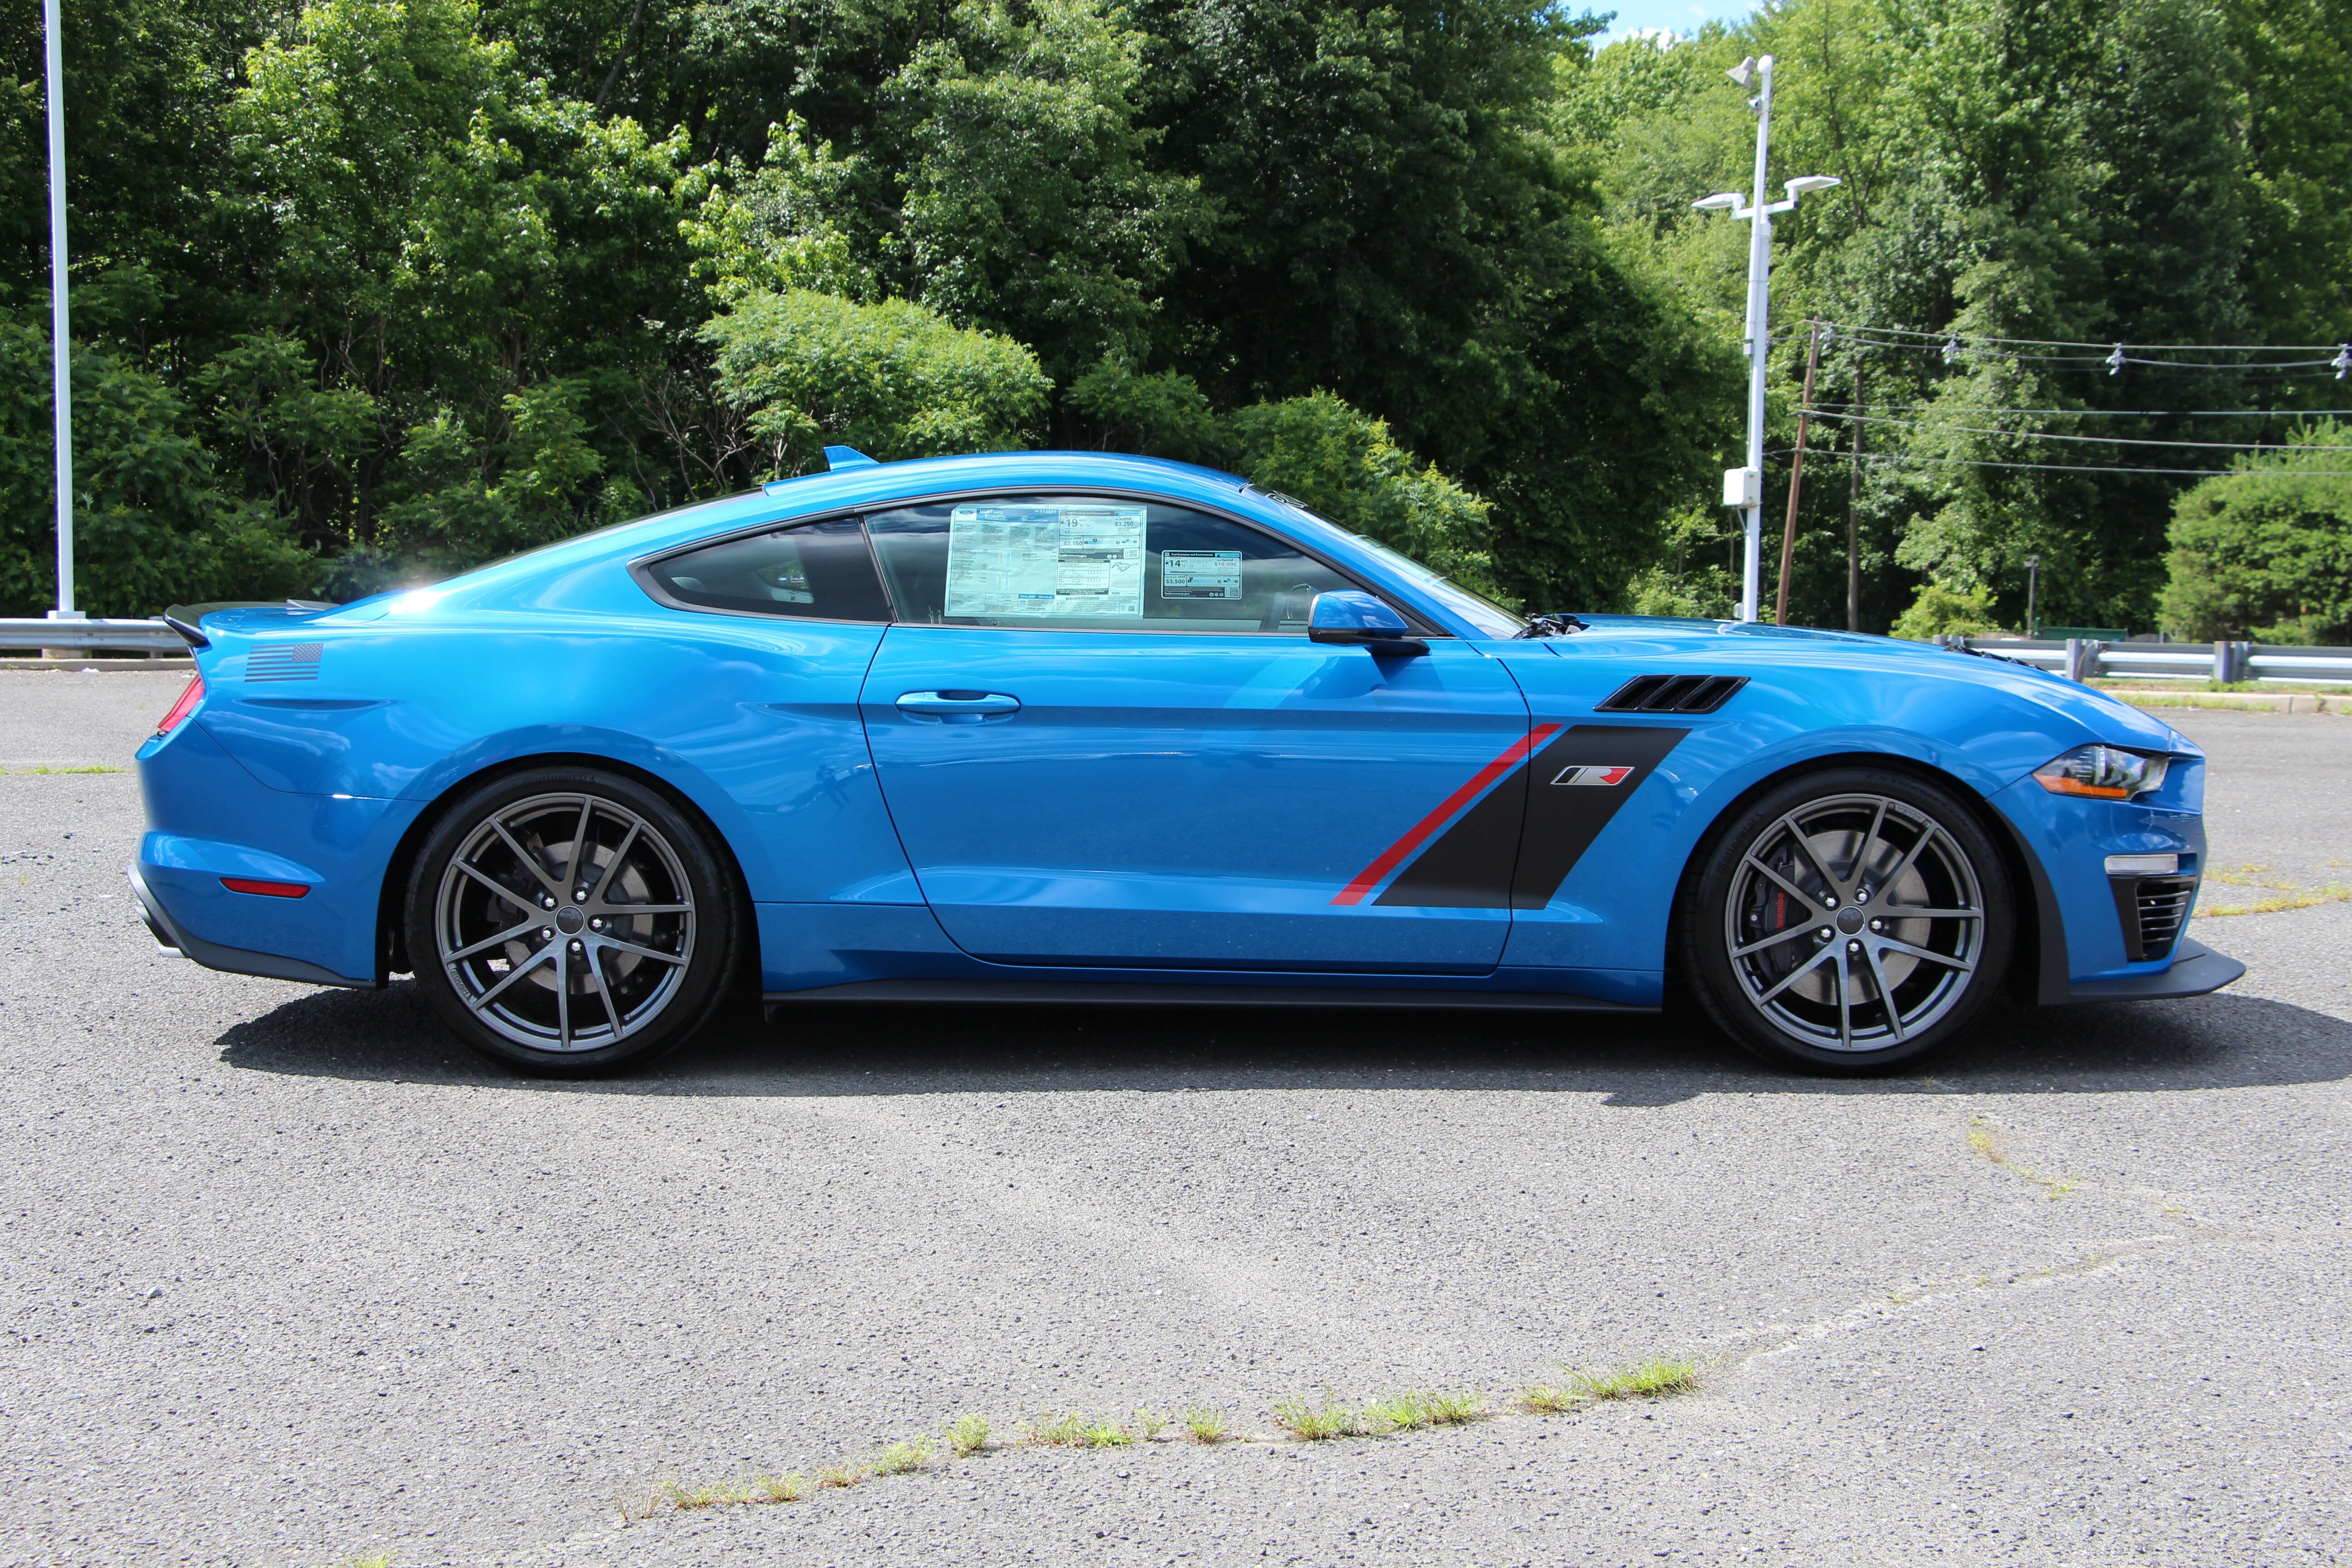 ROUSH Mustang Blue at All American Ford of Hackensack in Hackensack NJ